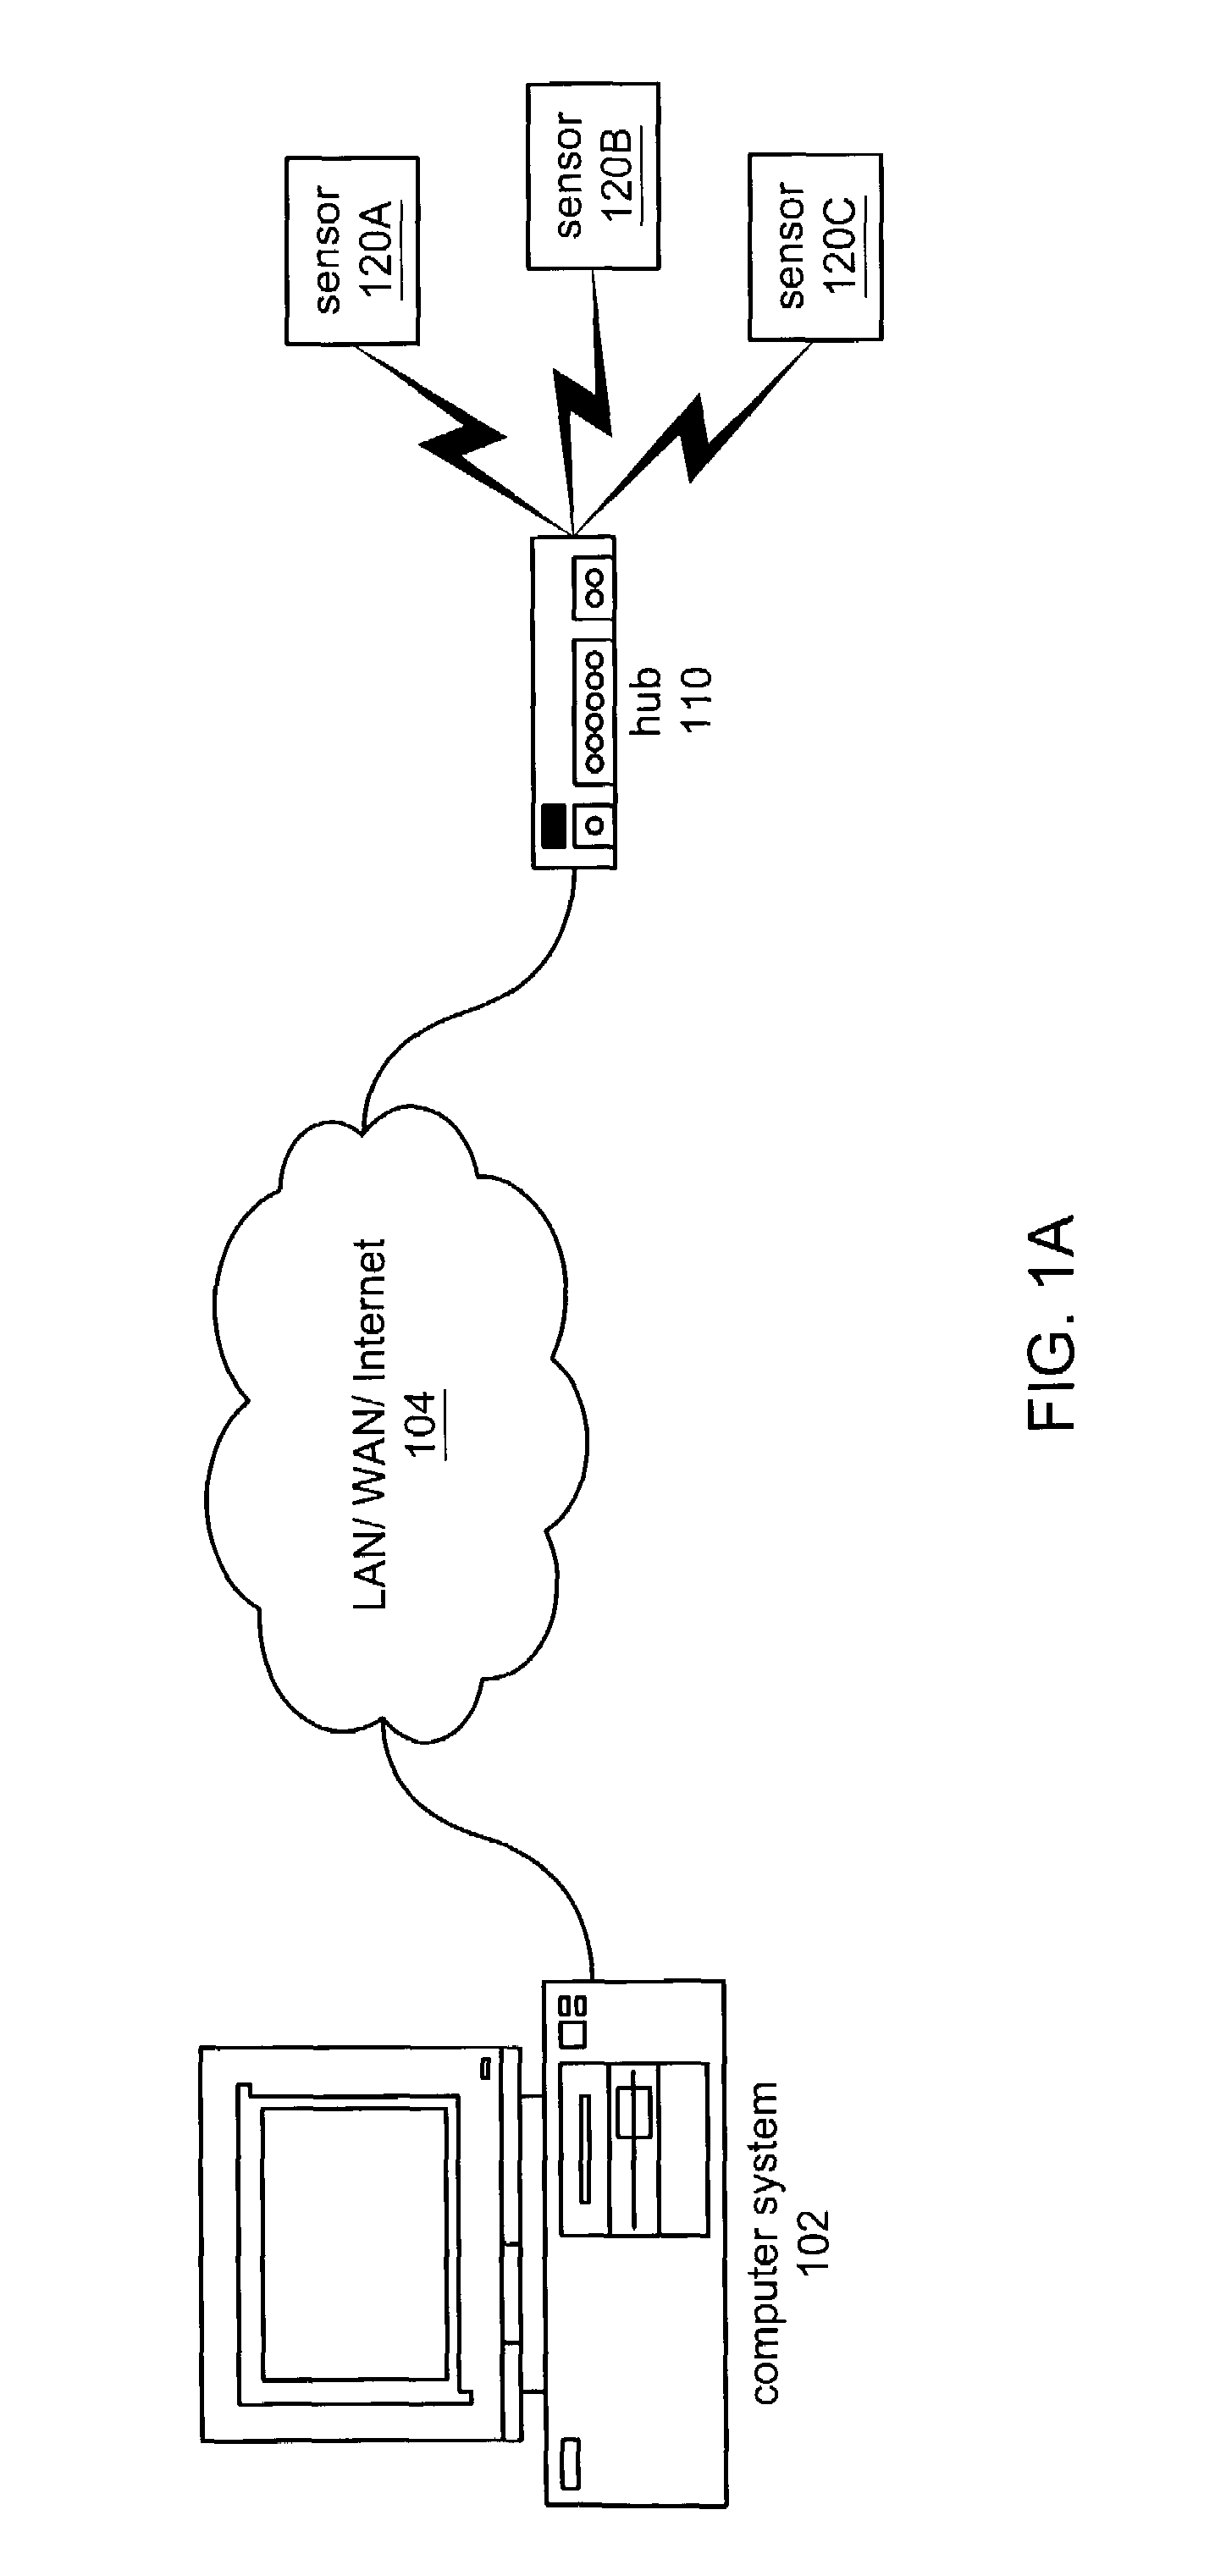 Wireless deployment / distributed execution of graphical programs to smart sensors